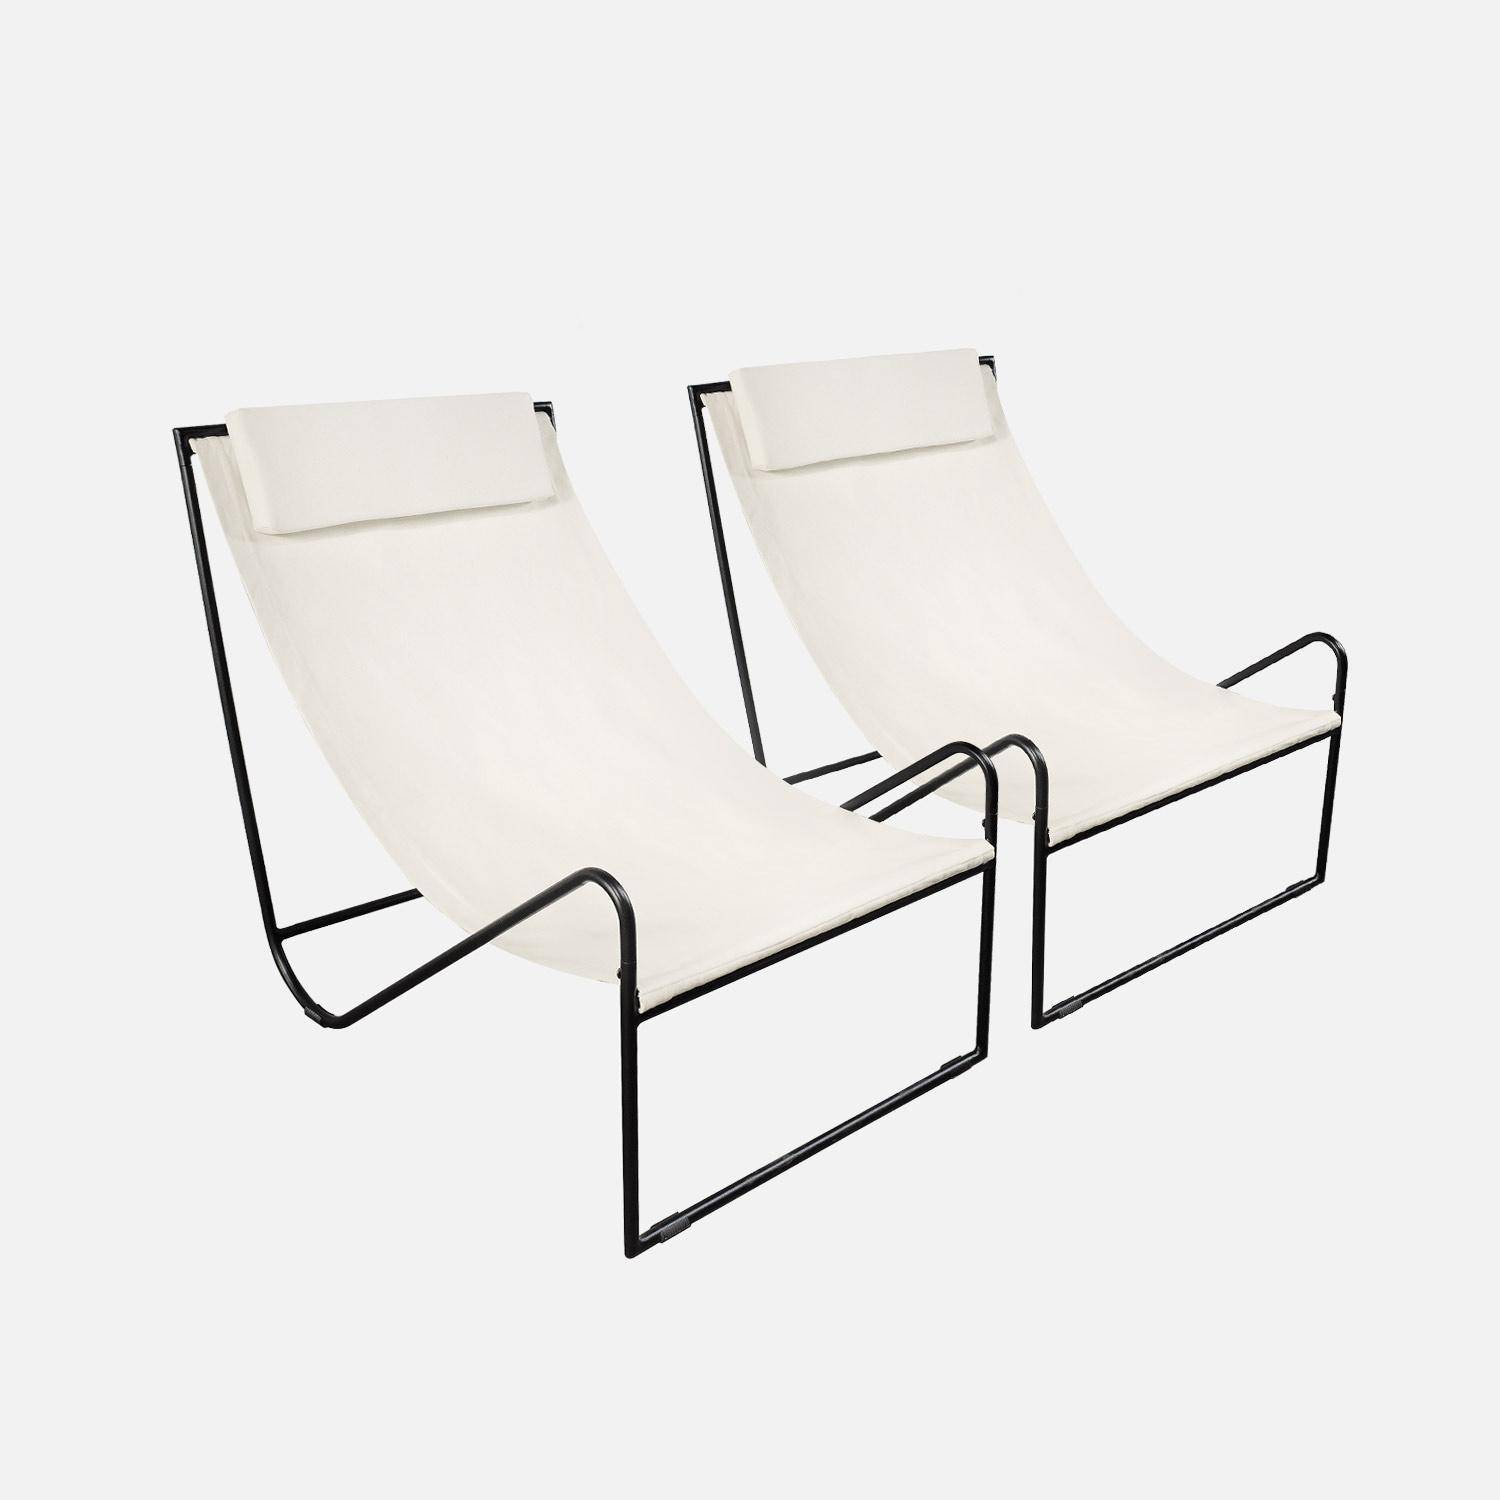 Pair of contemporary easy chairs, 61x90x76cm - Mancora - Off-White Photo5